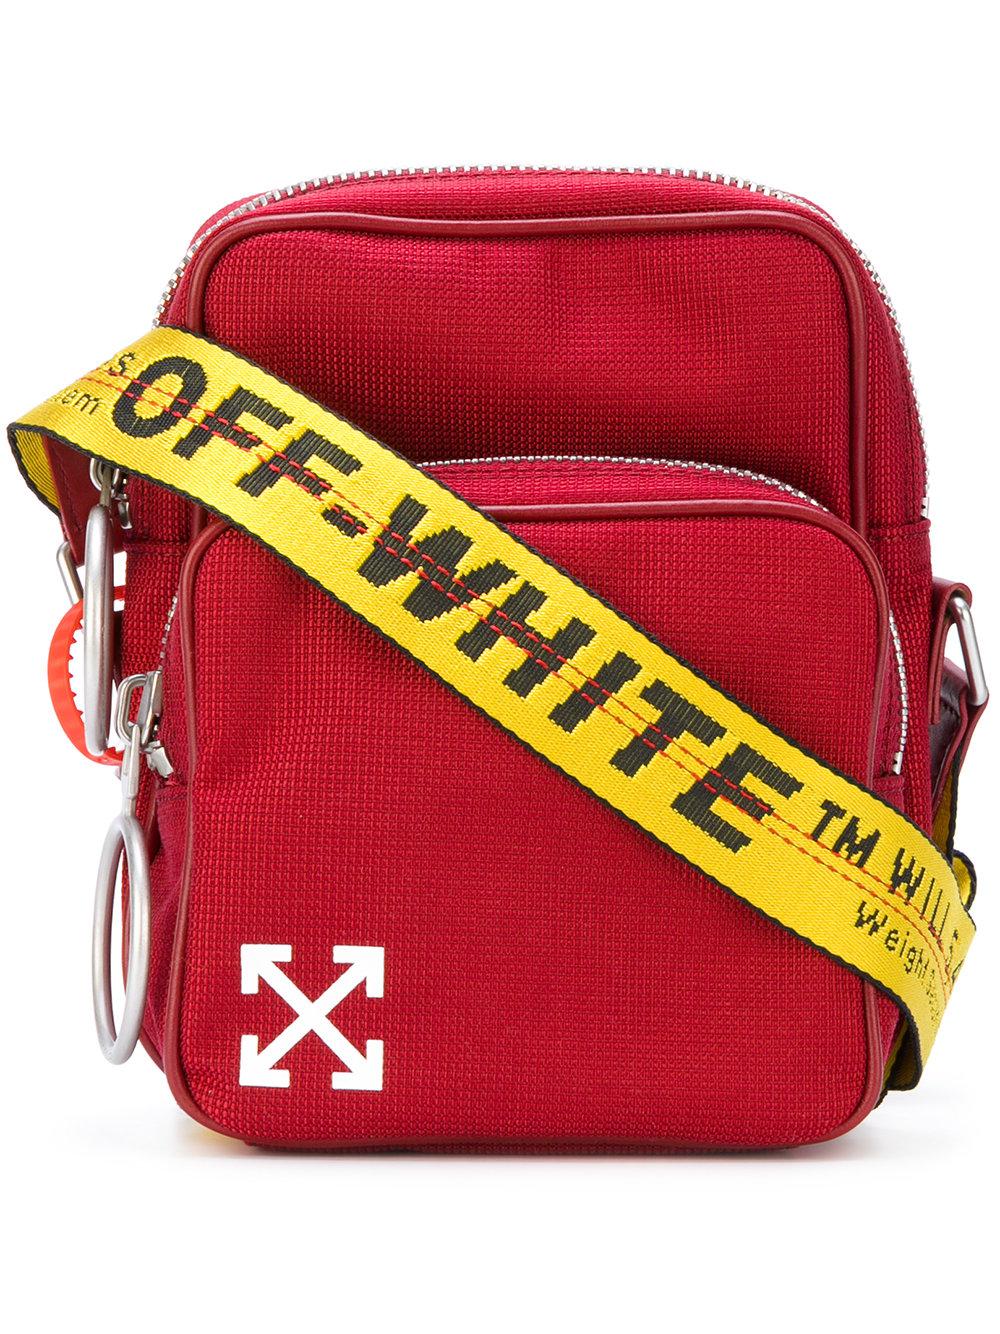 Off White Bag Sale Lyst | of Mike Mignola